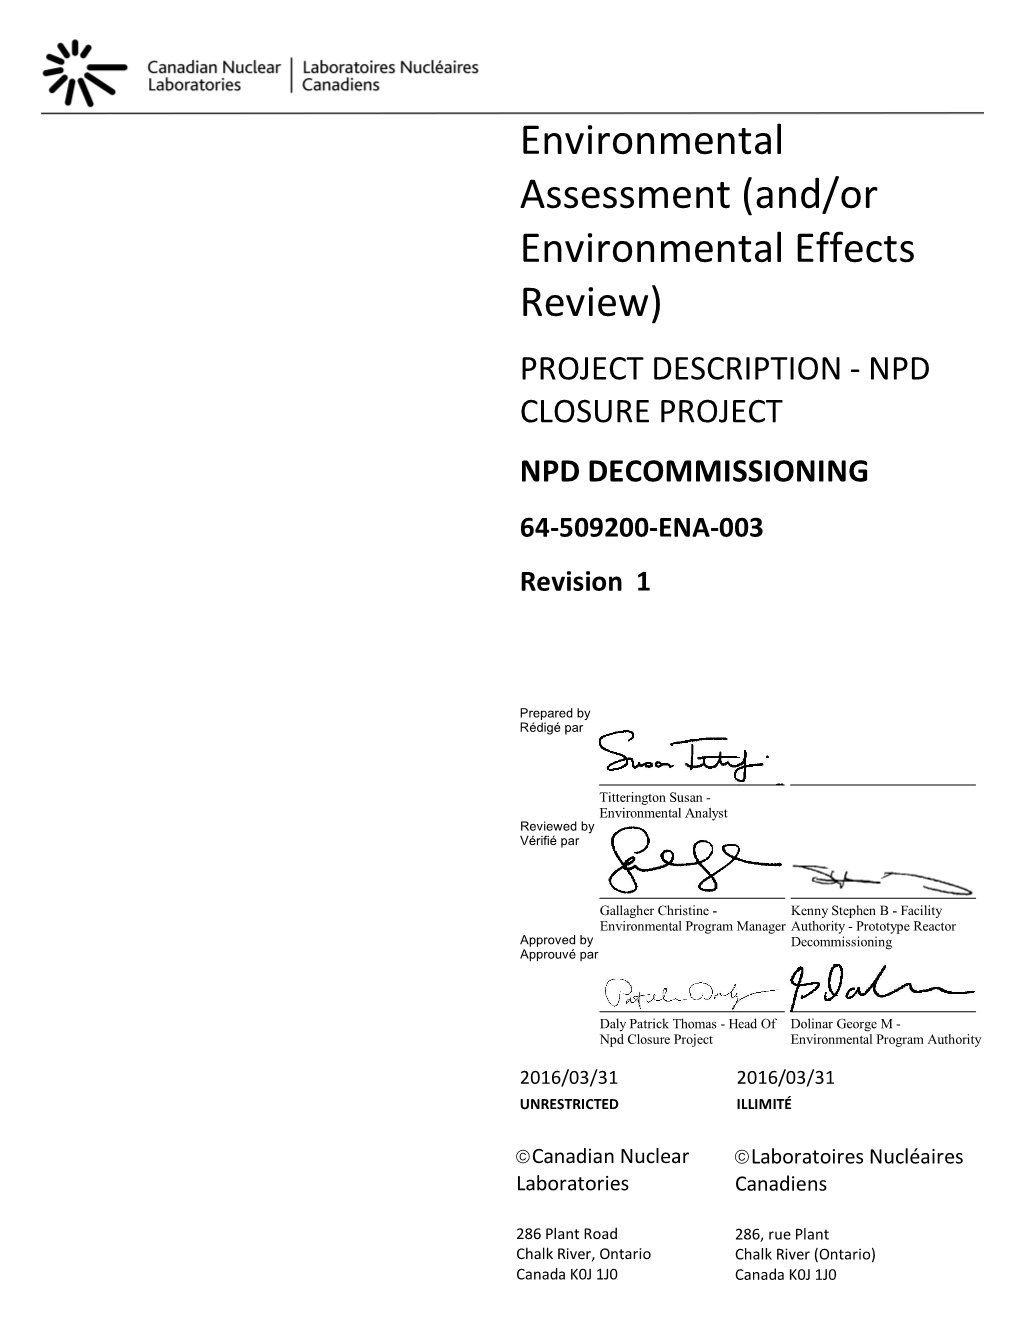 Environmental Assessment (And/Or Environmental Effects Review) PROJECT DESCRIPTION - NPD CLOSURE PROJECT NPD DECOMMISSIONING 64-509200-ENA-003 Revision 1